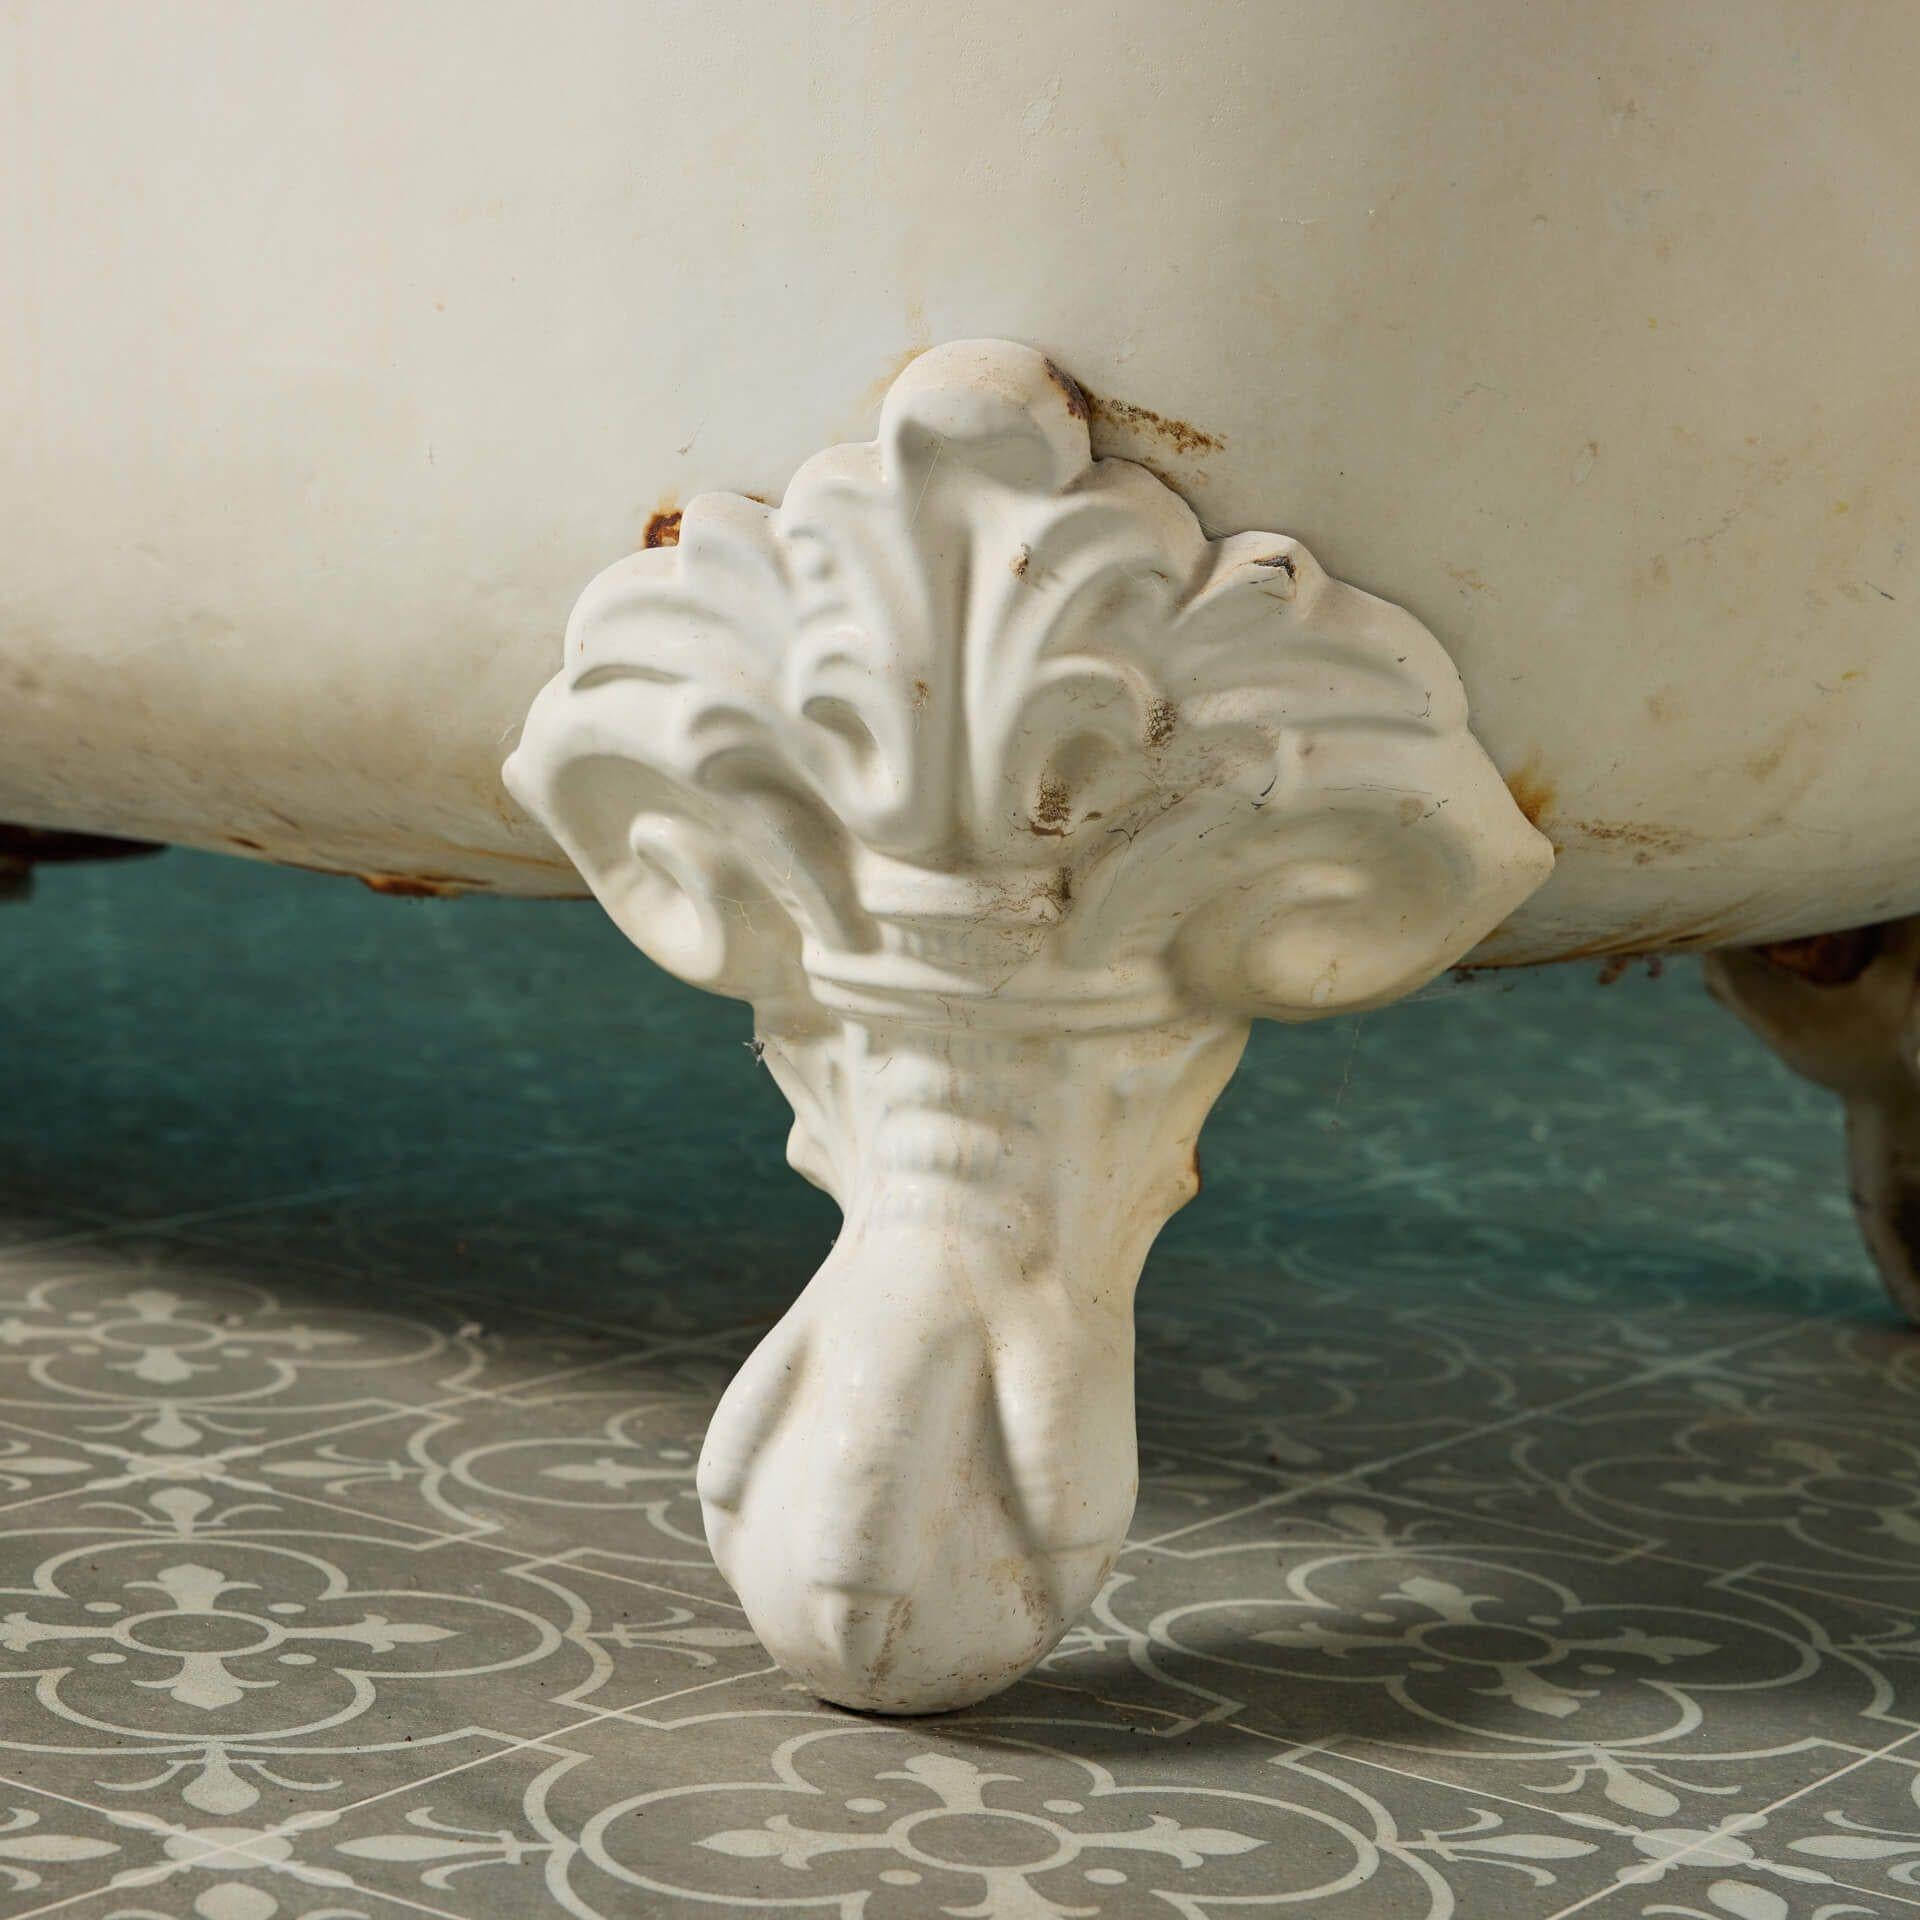 Ceramic Antique Double Ended Bathtub with Ball and Claw Feet by George Jennings For Sale